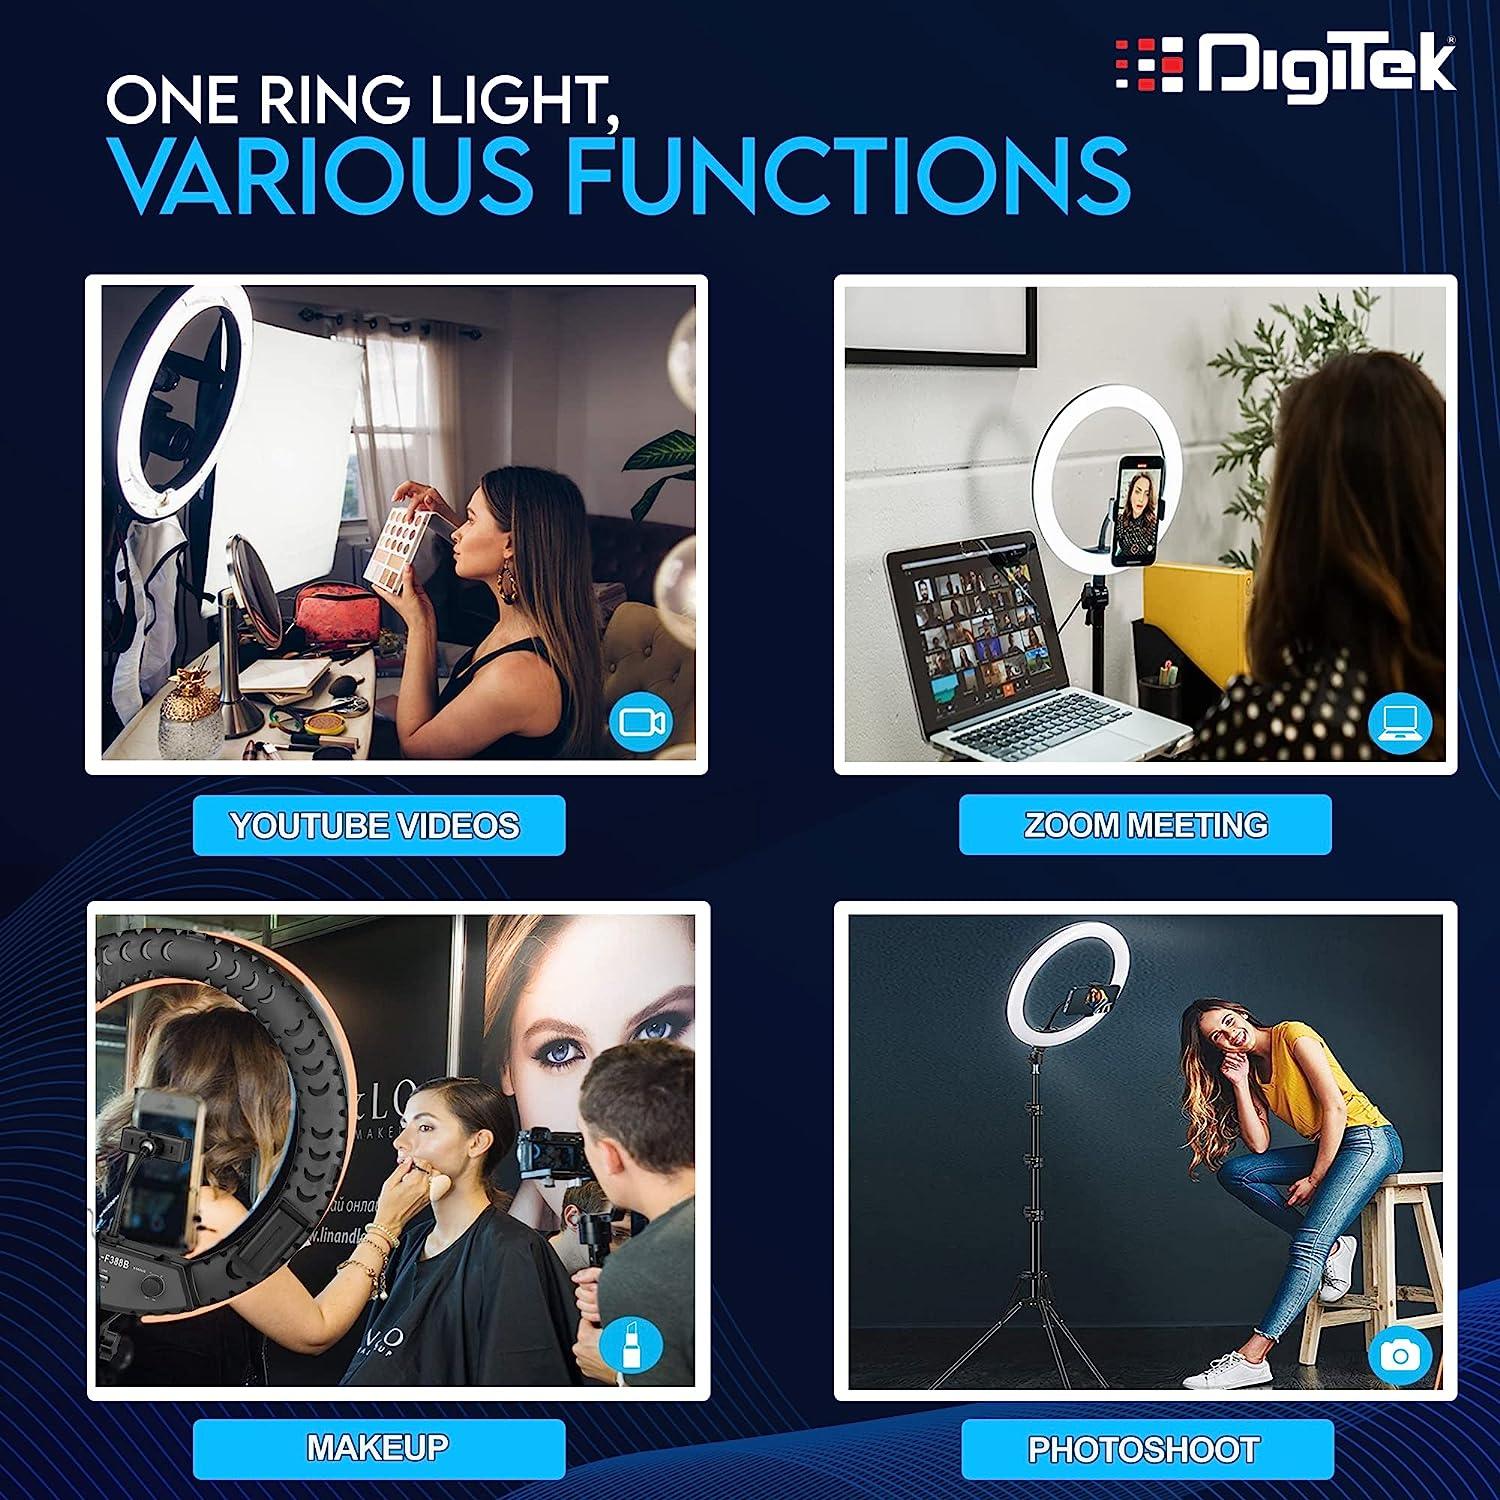 digitek drl 19 professional big led ring light with remote and 2 color modes dimmable lighting for youtube photo shoot video shoot live stream makeup and vlogging compatible with iphone android phones 33787326267625